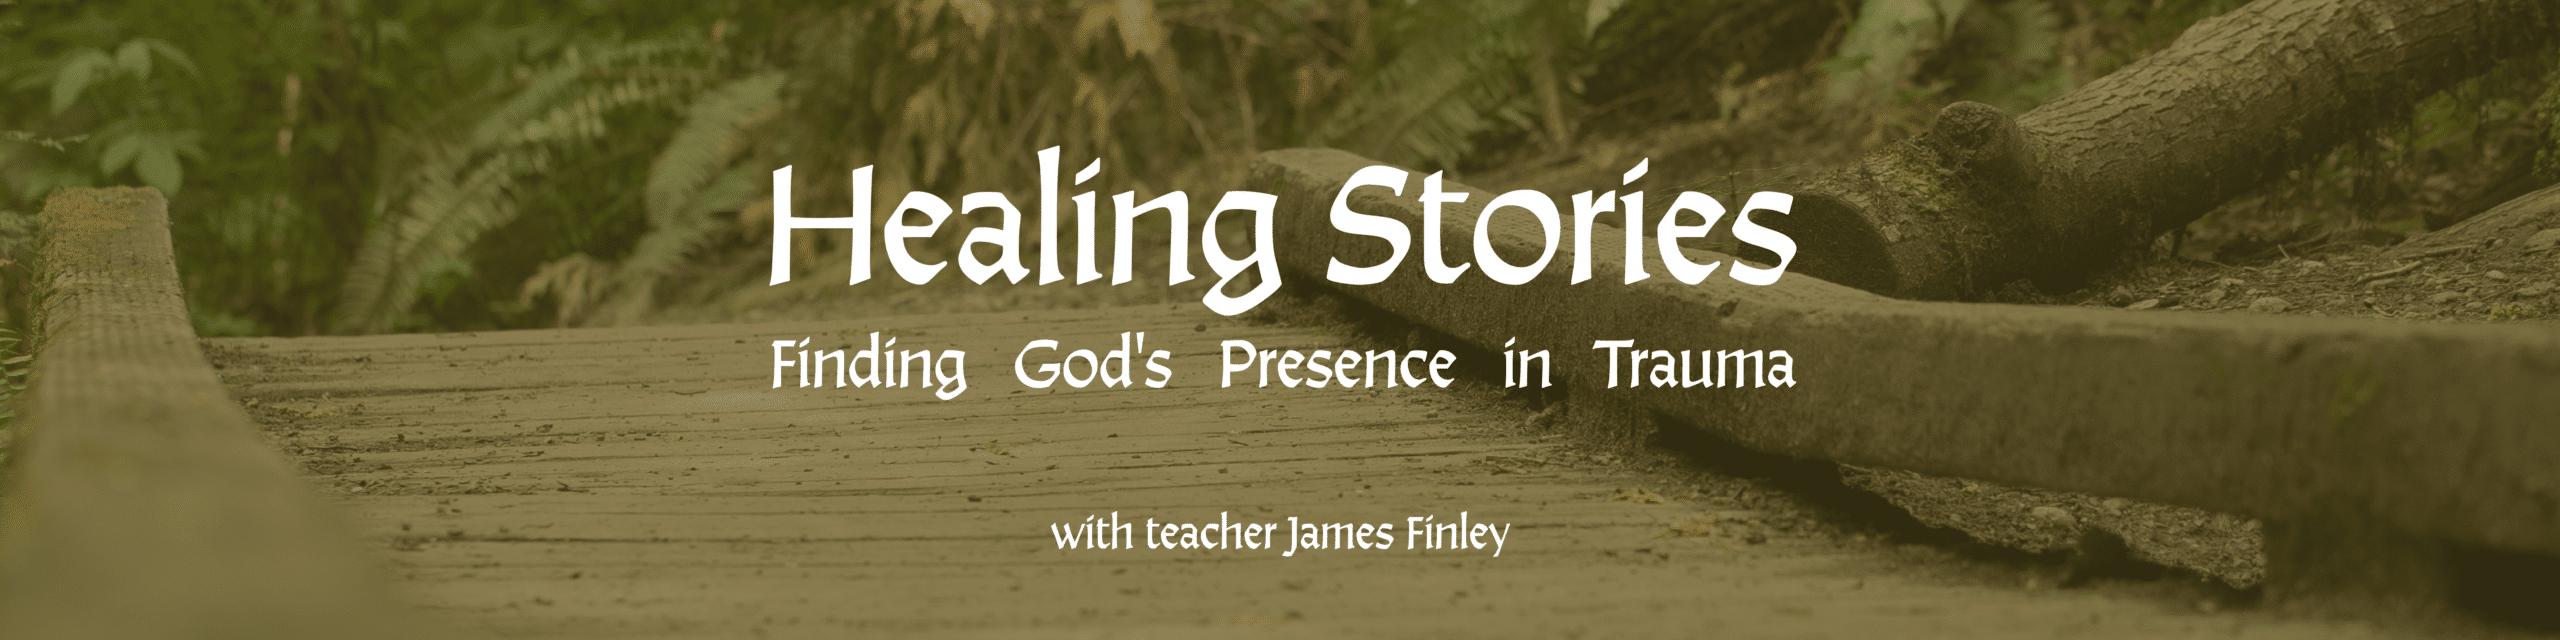 Healing Stories Finding God's Presence in Trauma with James Finley